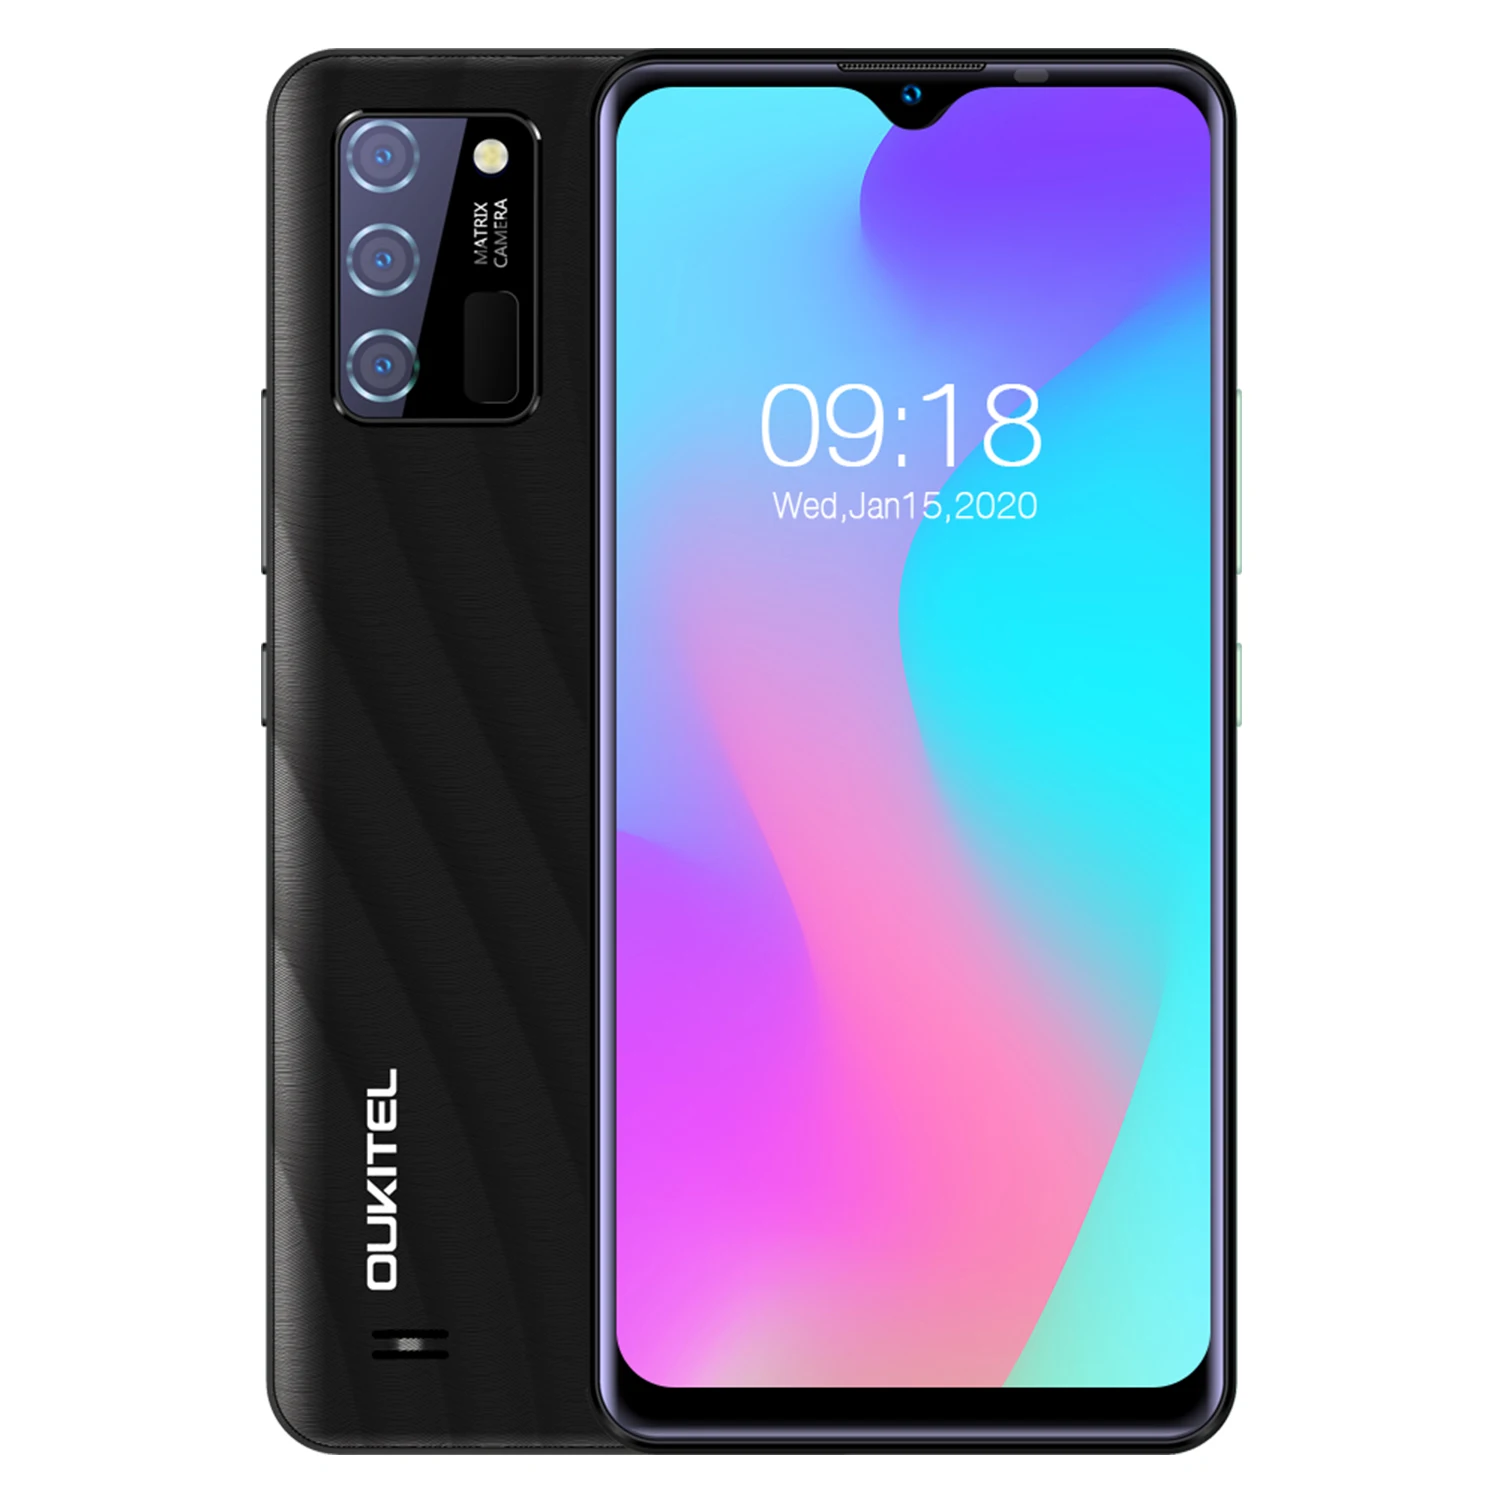 android umx cell phone OUKITEL C25 6.52'' HD+ 4GB+32GB Android 11 Smartphone 5000mAh Battery 13MP Triple Rear Camera Mobile Phone best android cellphone Android Phones